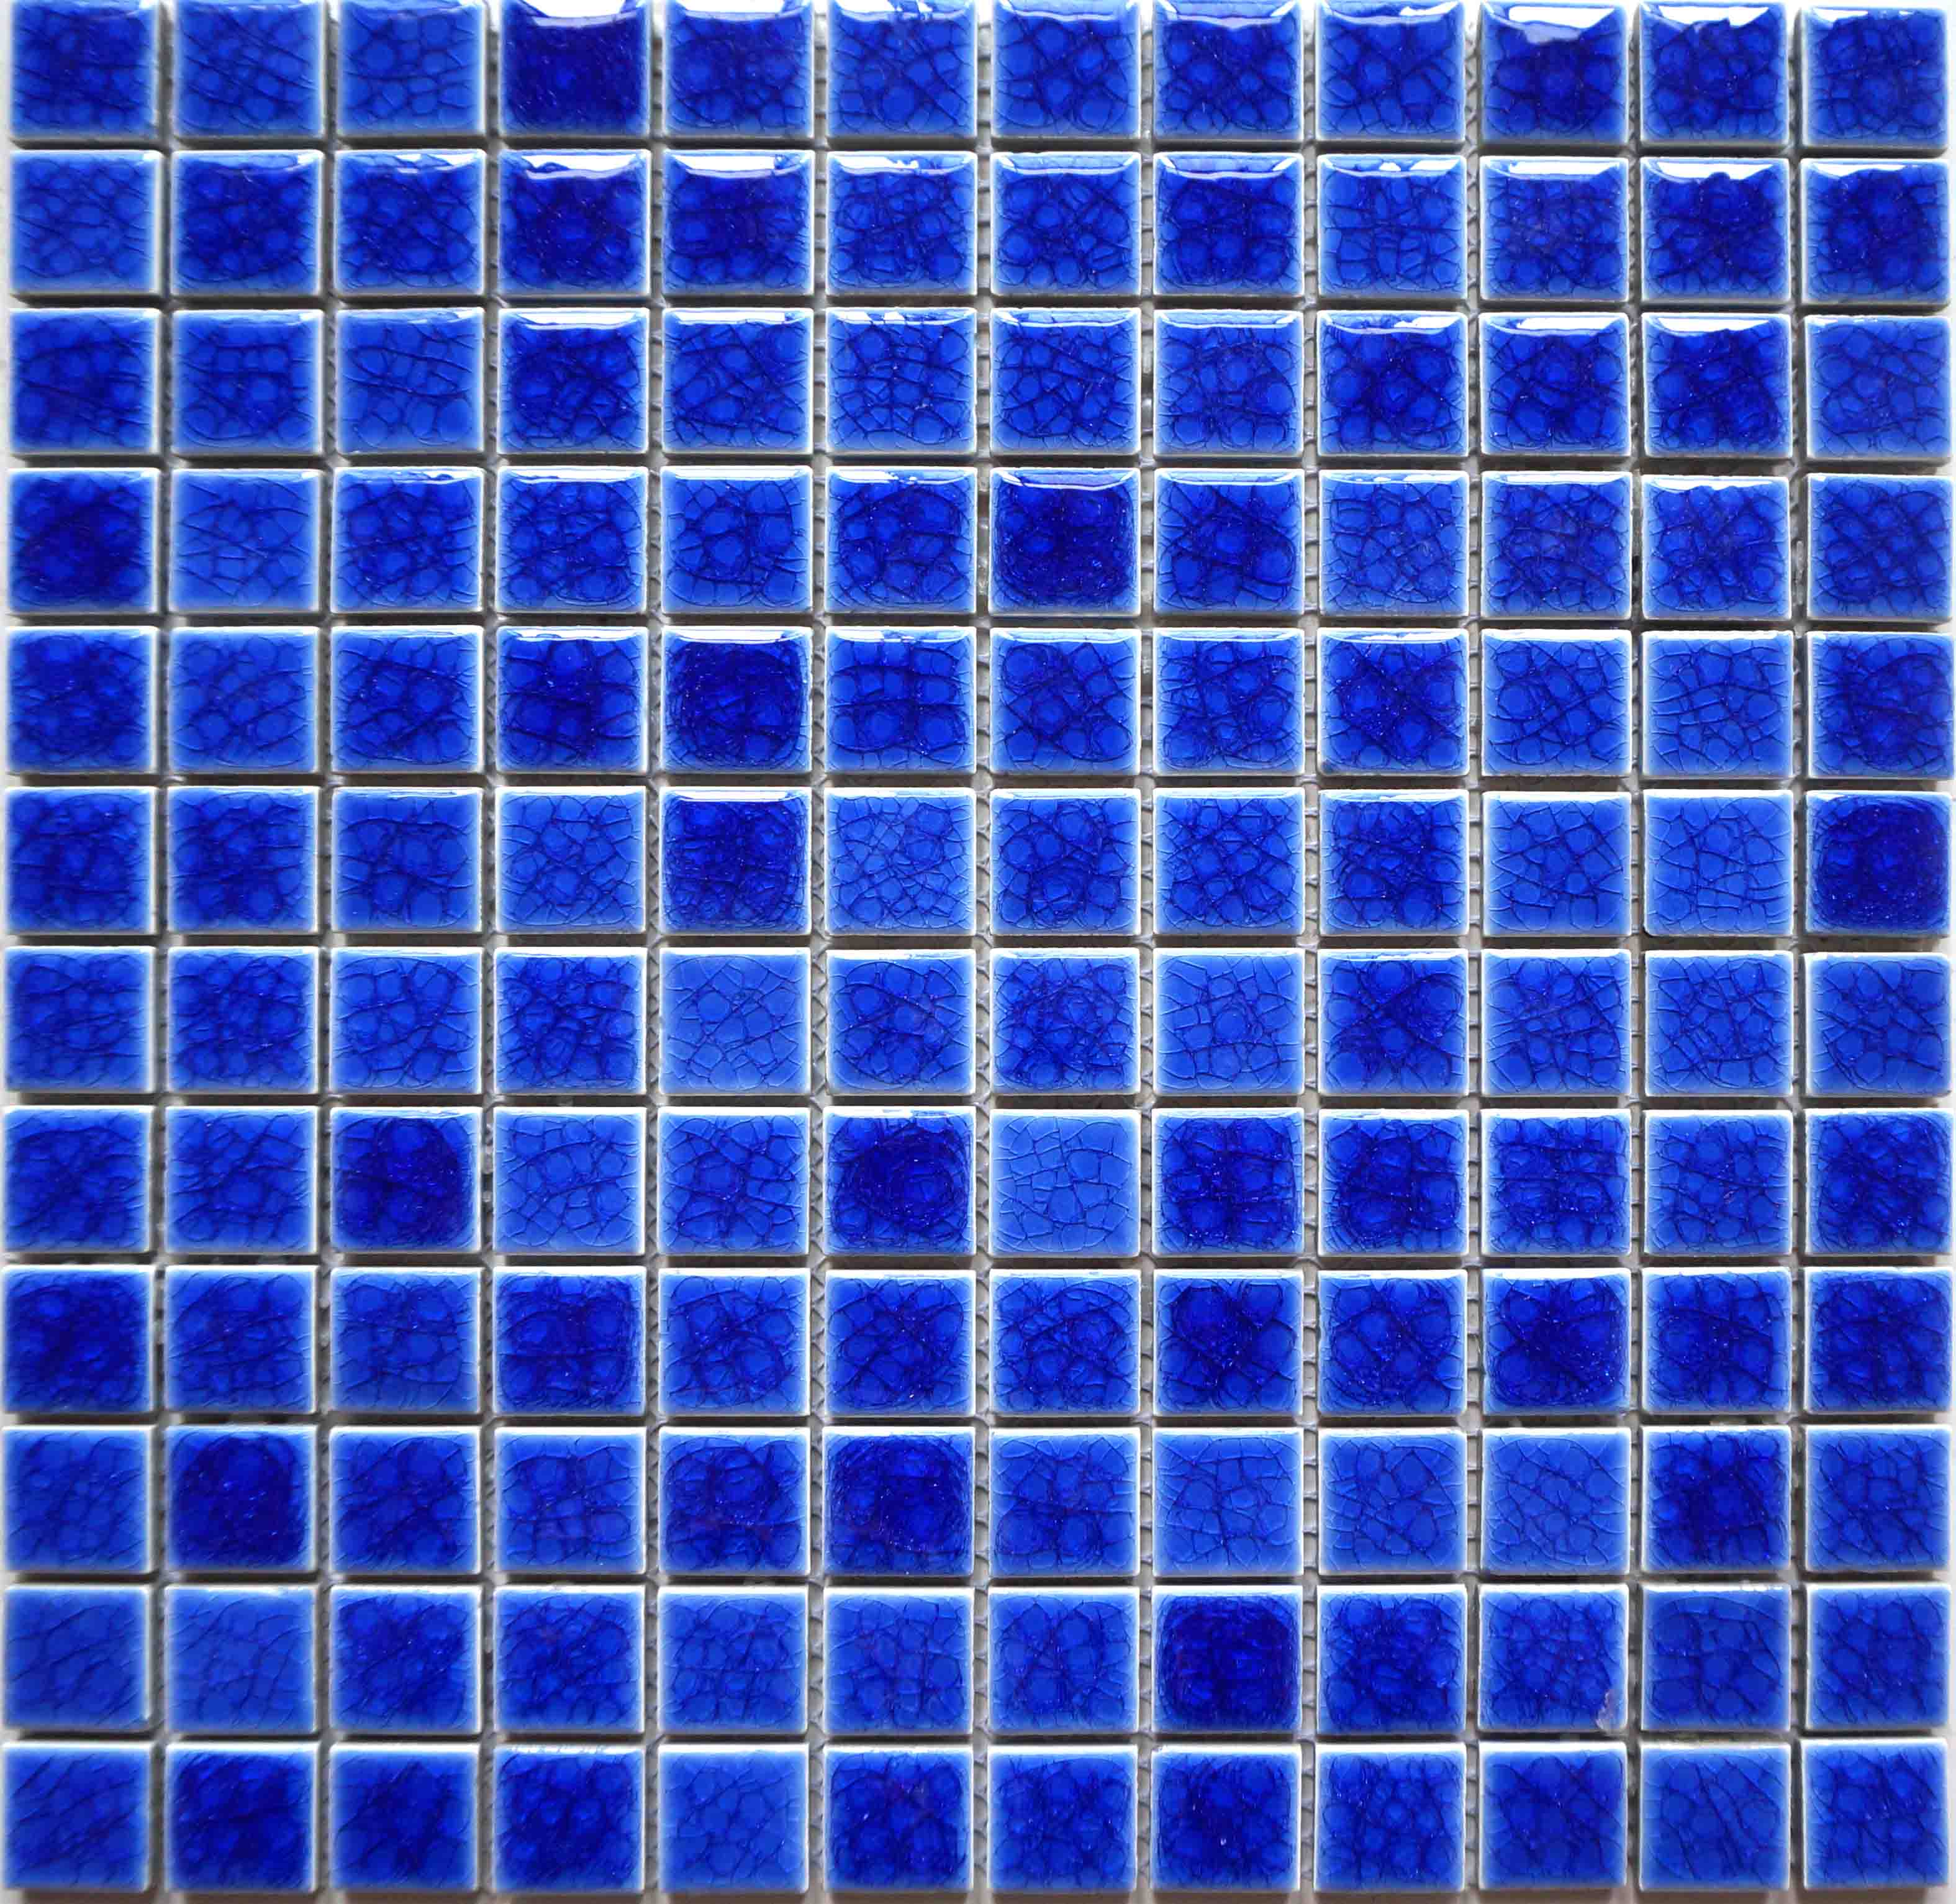 23x23mm Blue Mixed Sqaure Ceramic Mosaic For Pool